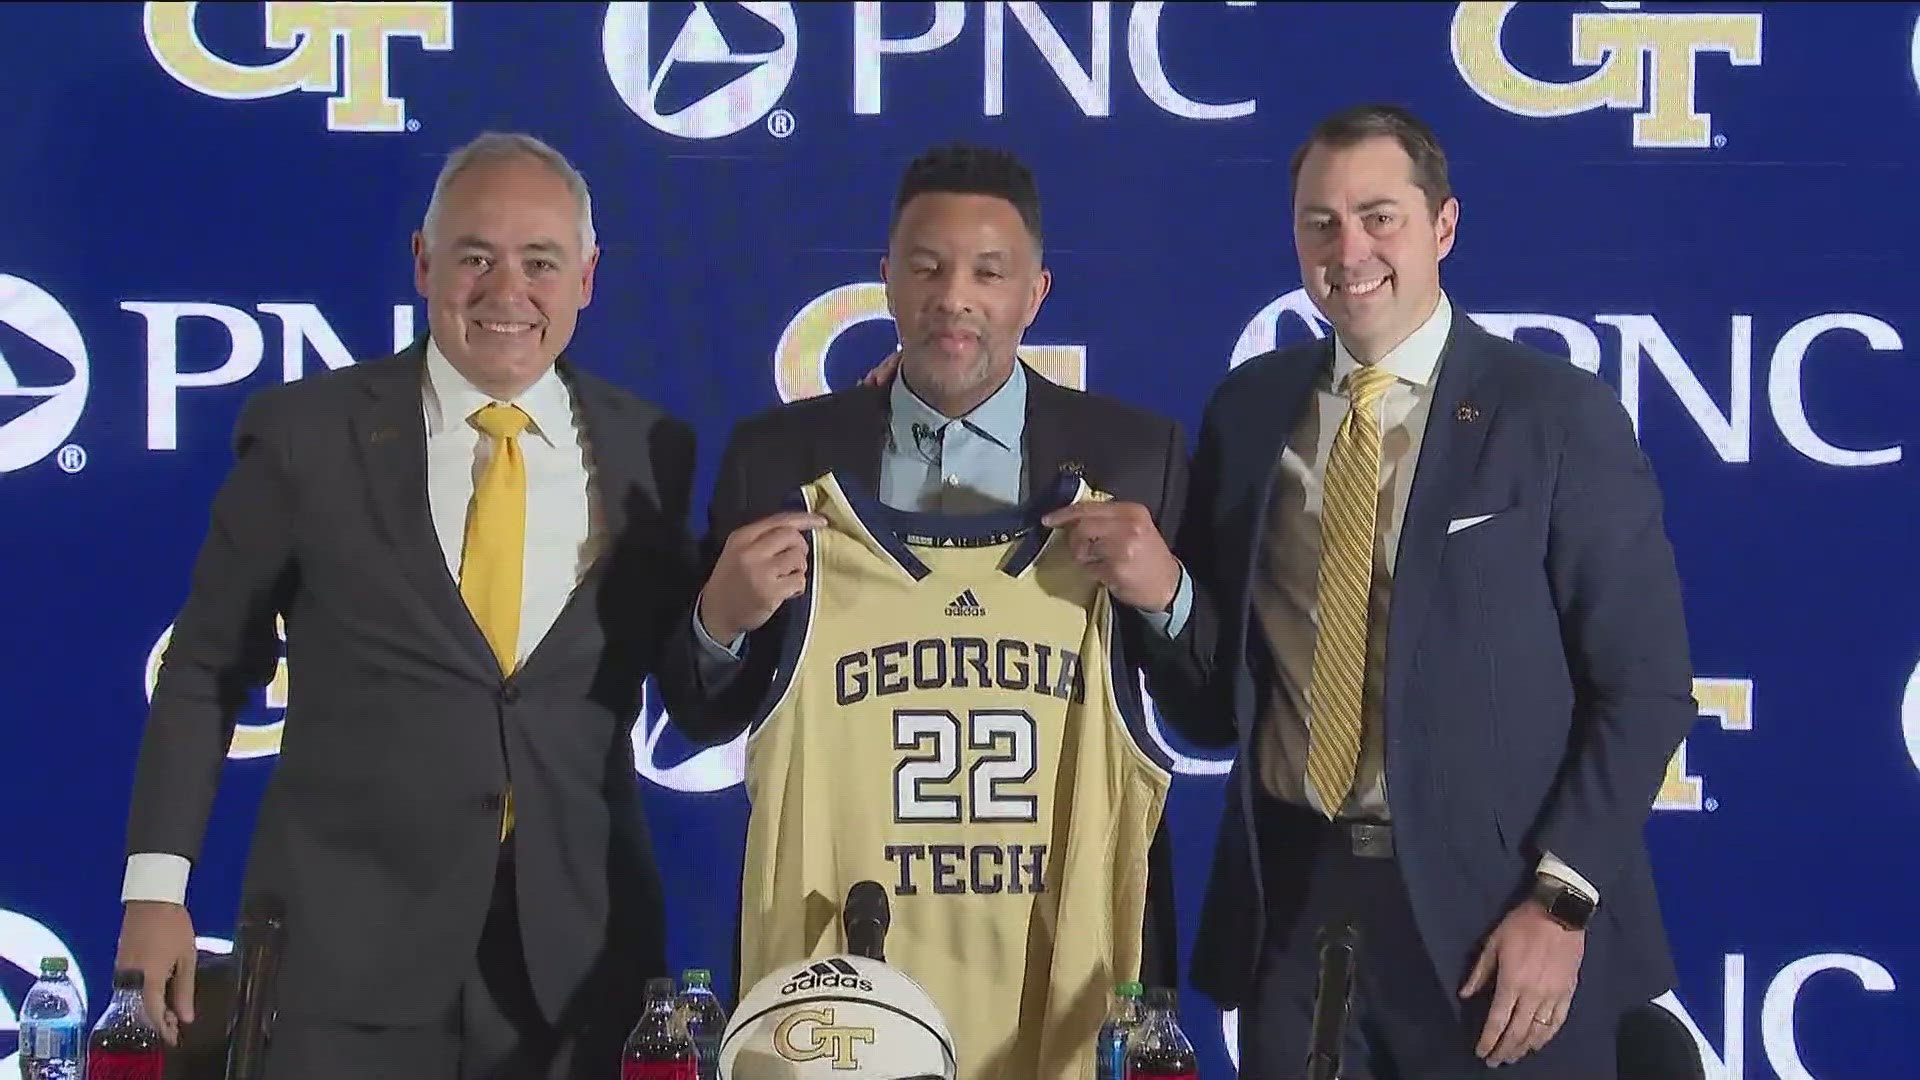 Damon Stoudamire delivered an emotional introduction at Georgia Tech on Tuesday, tearing up and placing the Yellow Jackets' history of success at the forefront.